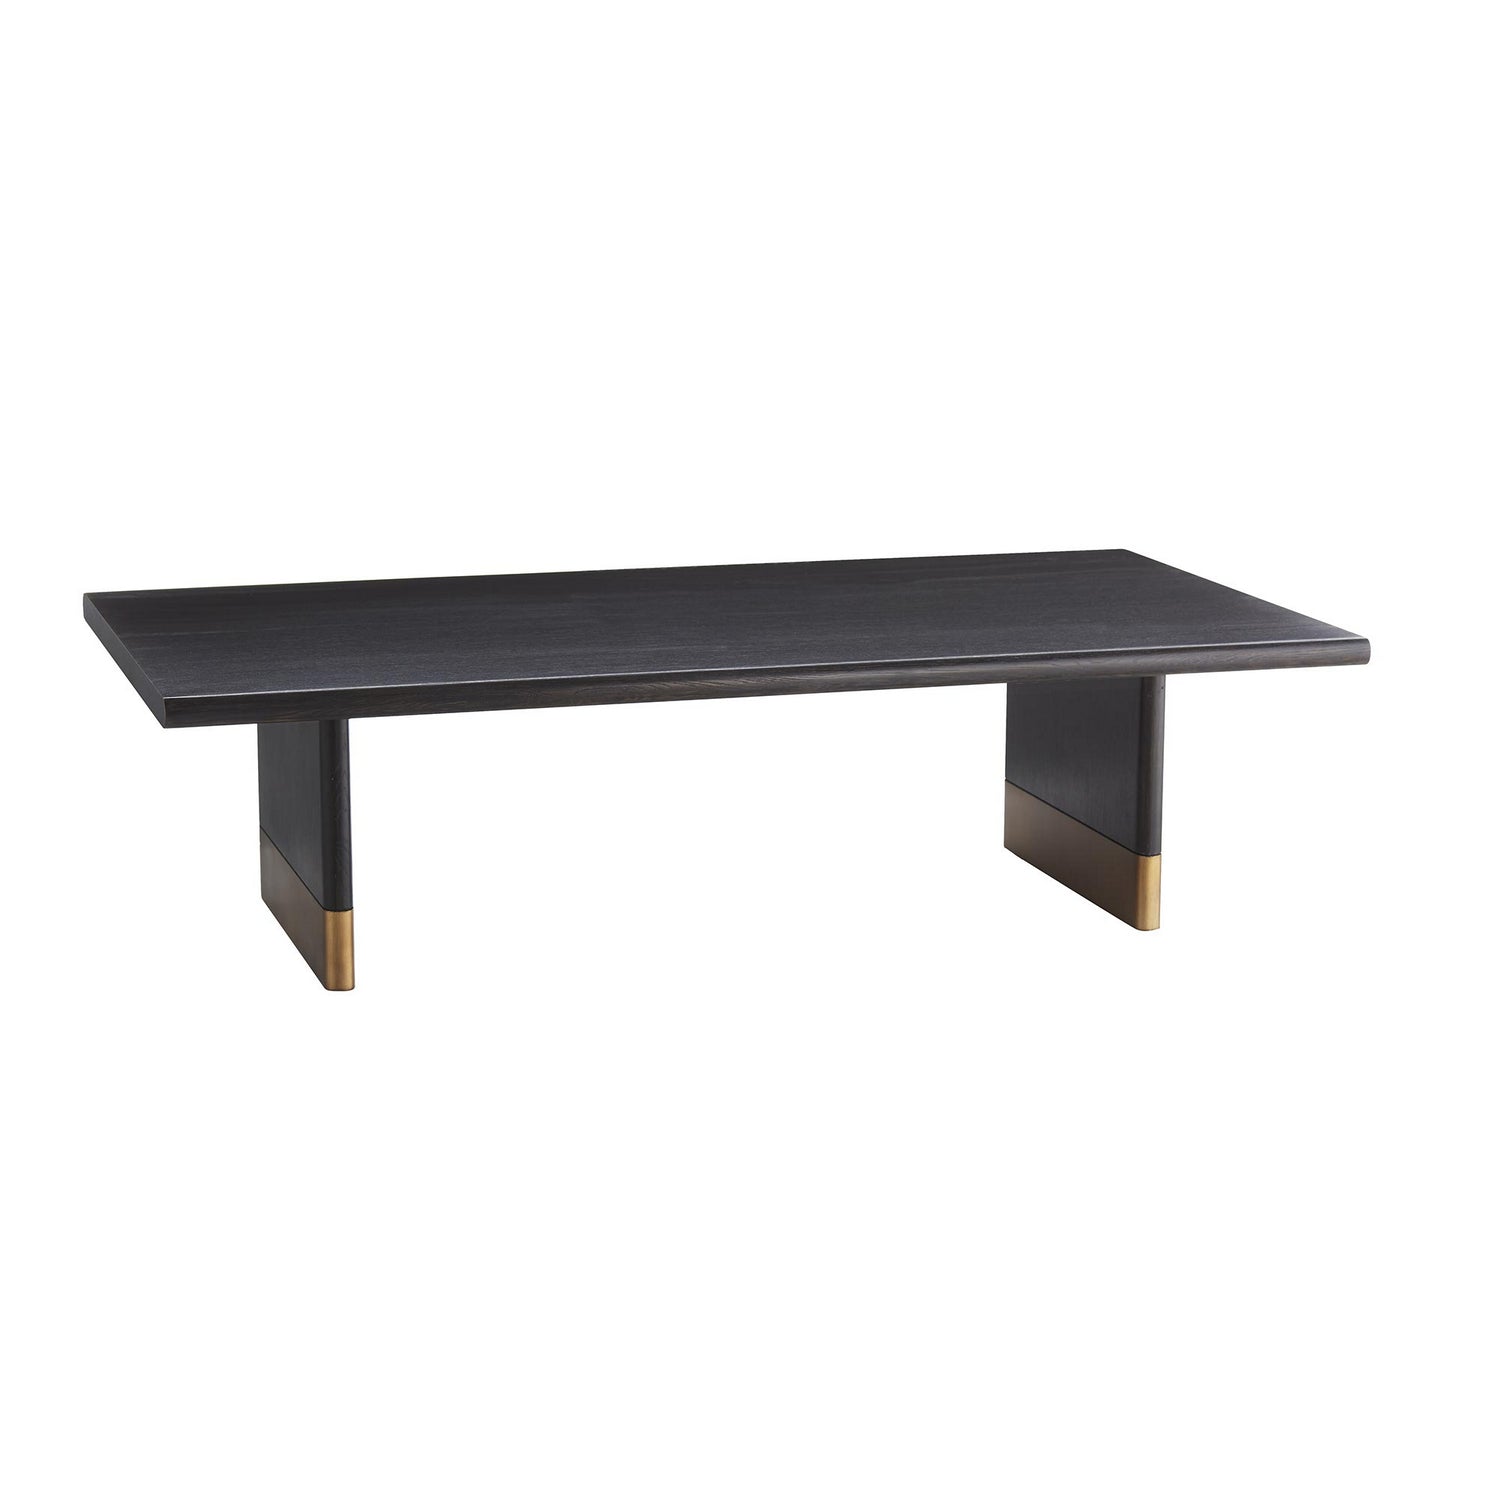 Coffee Table from the Lawson collection in Ebony finish